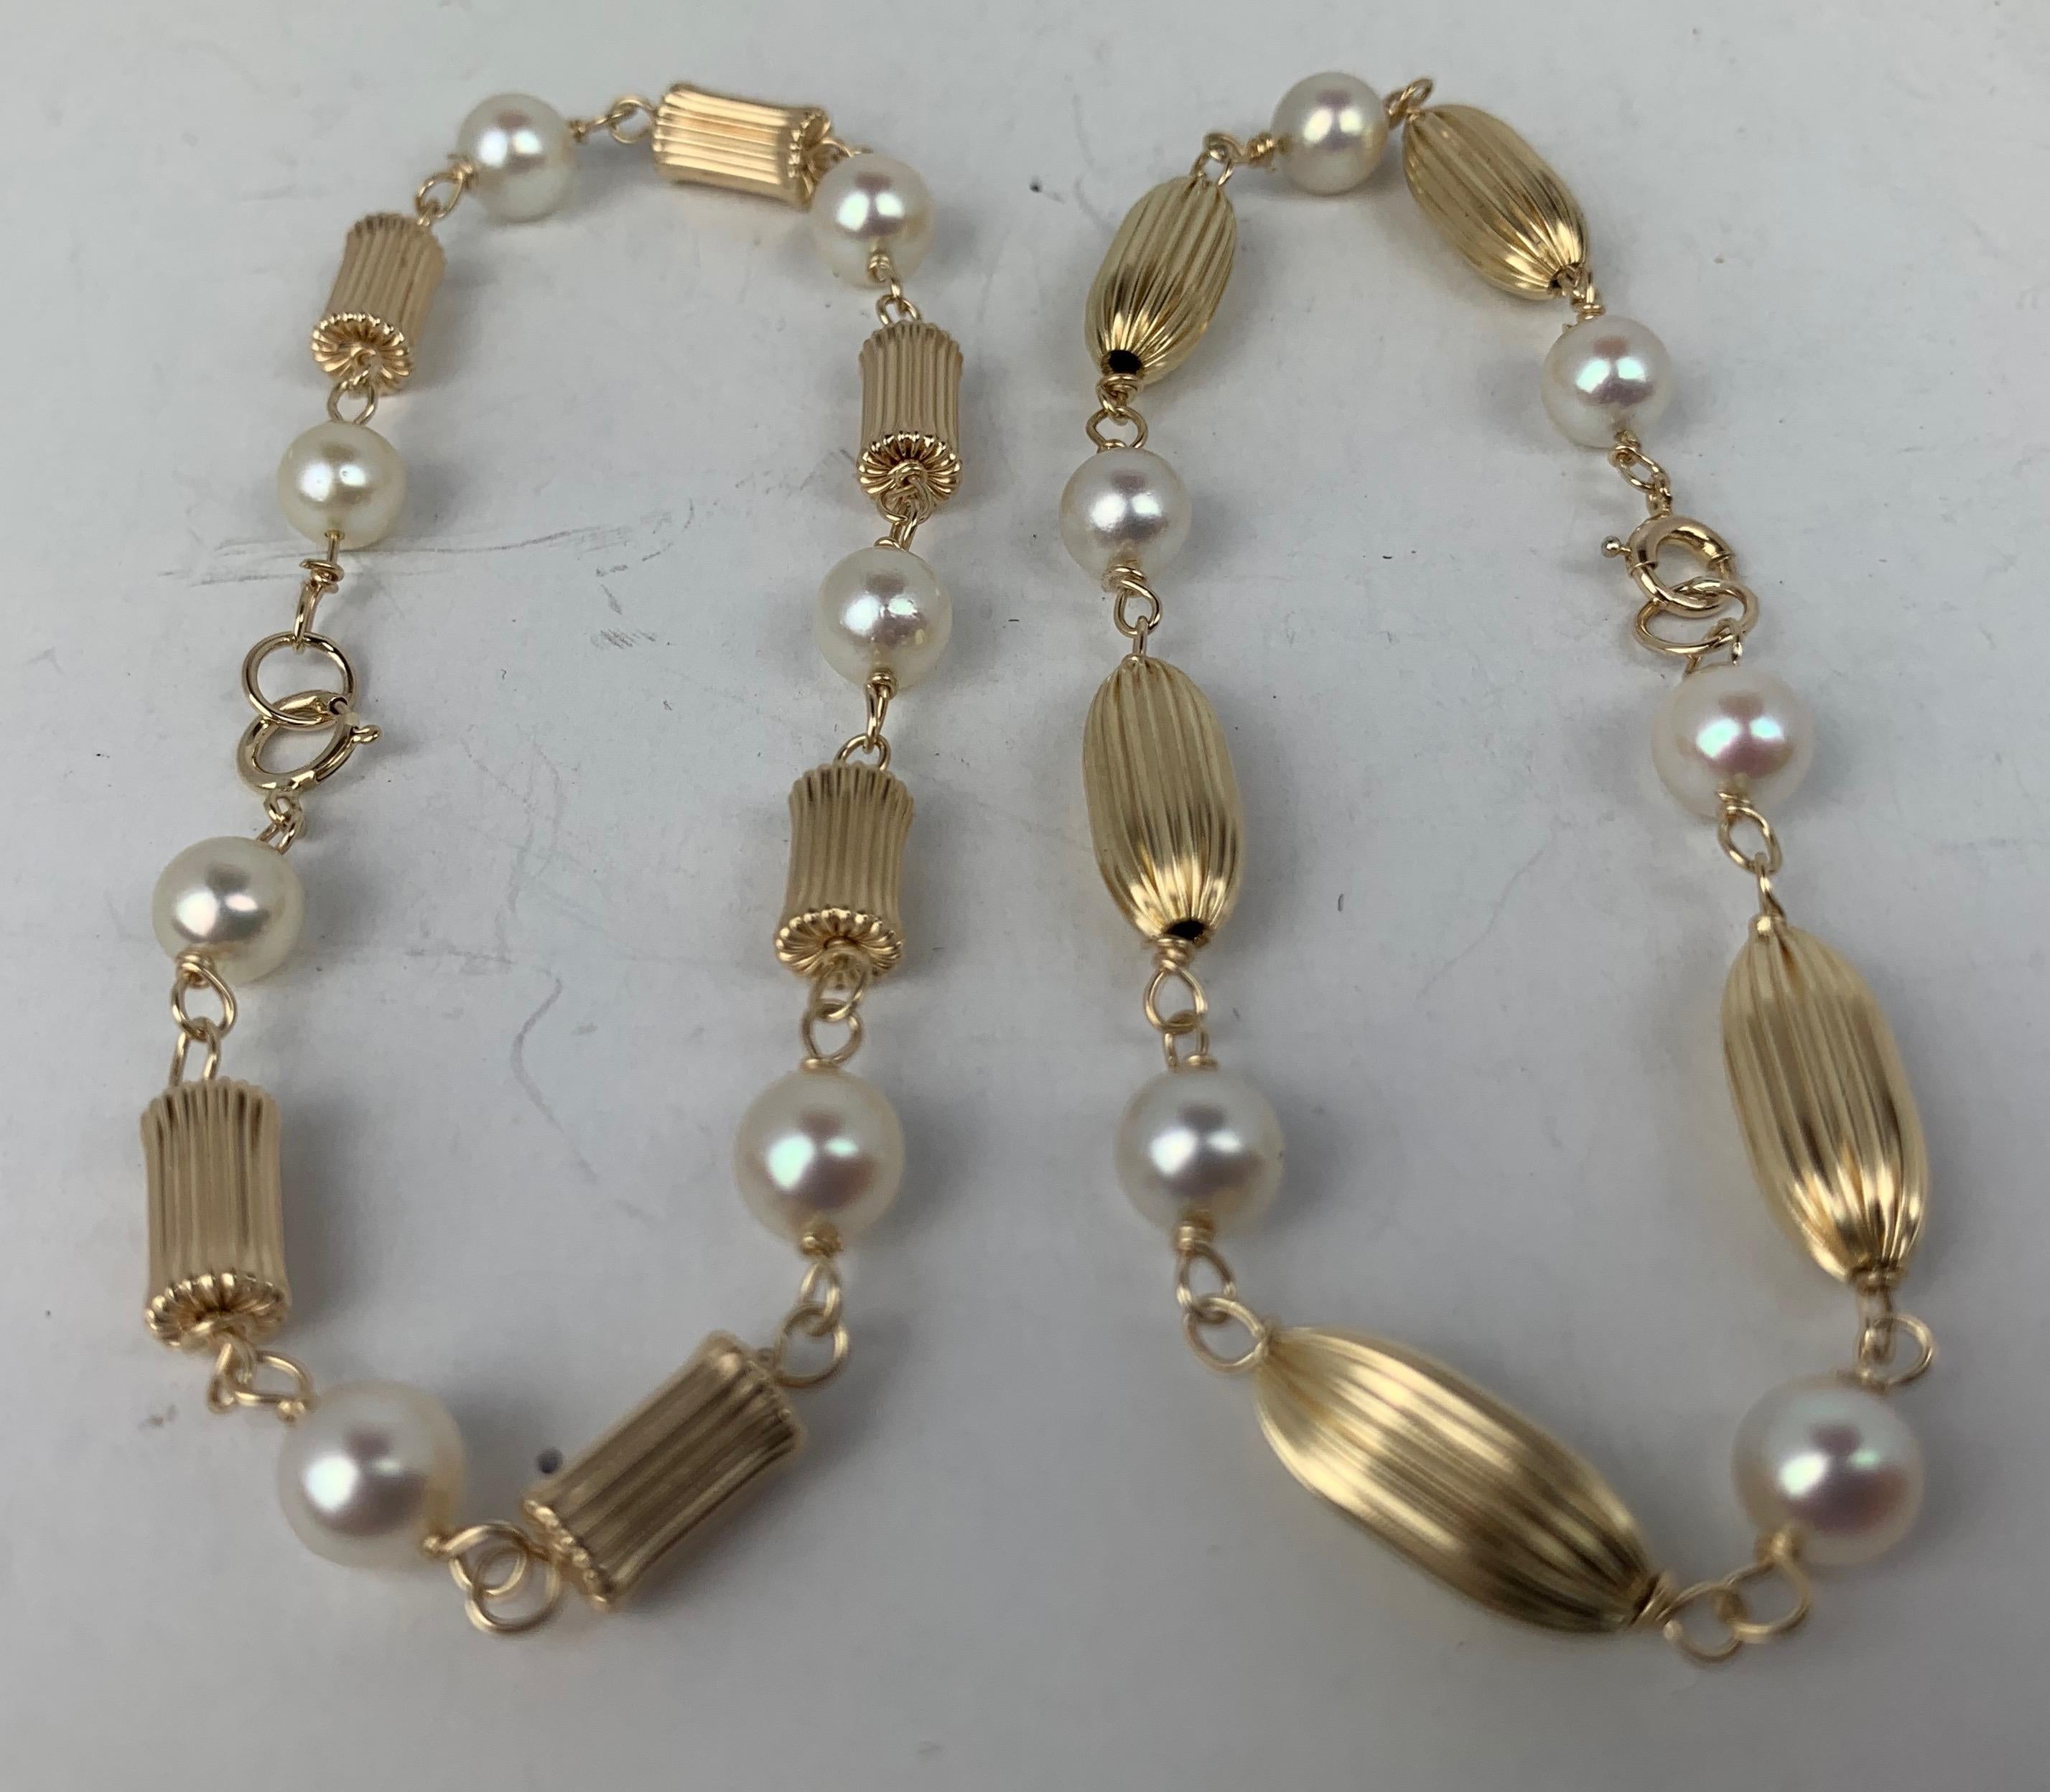 My client had this pair of bracelets custom made in the late 1950's.  She selected the gold beads and pearls and had her jeweler create them.  The fluted beads are 14k yellow gold, as are all of the parts and clasps.
Professionally cleaned and